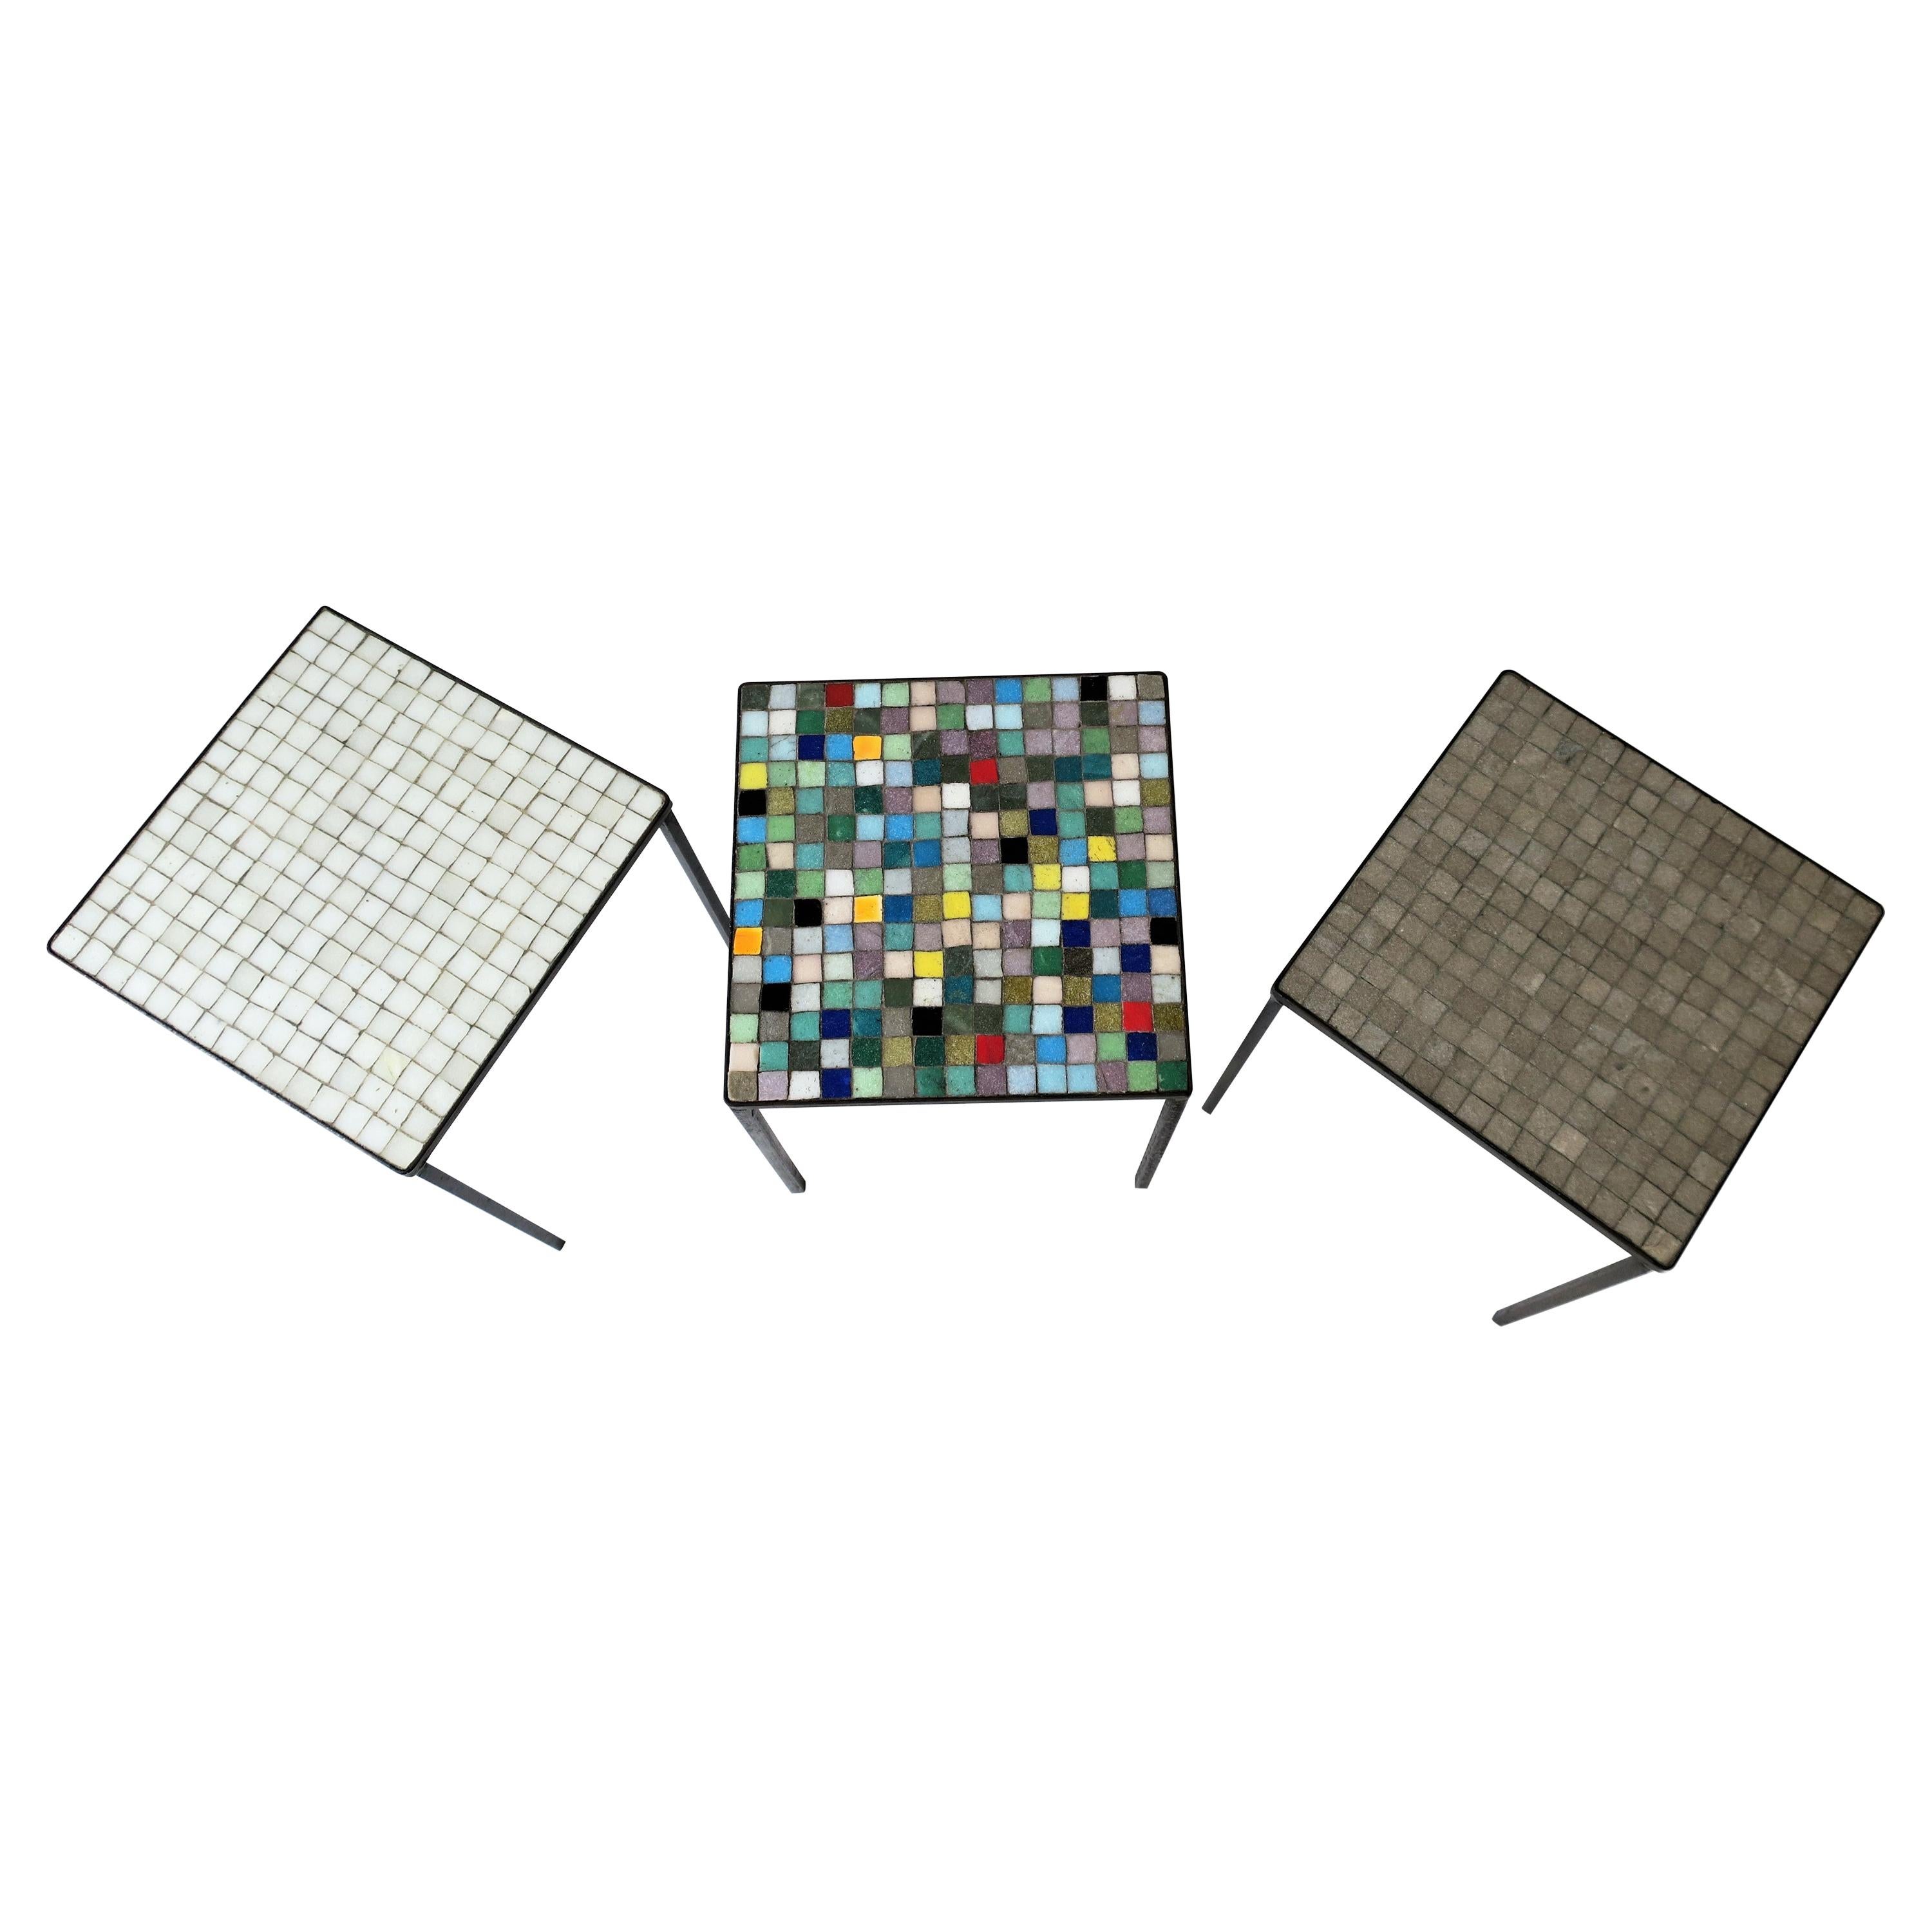 Italian Mid-Century Modern Mosaic Tile Stacking or Side Tables, Set of 3